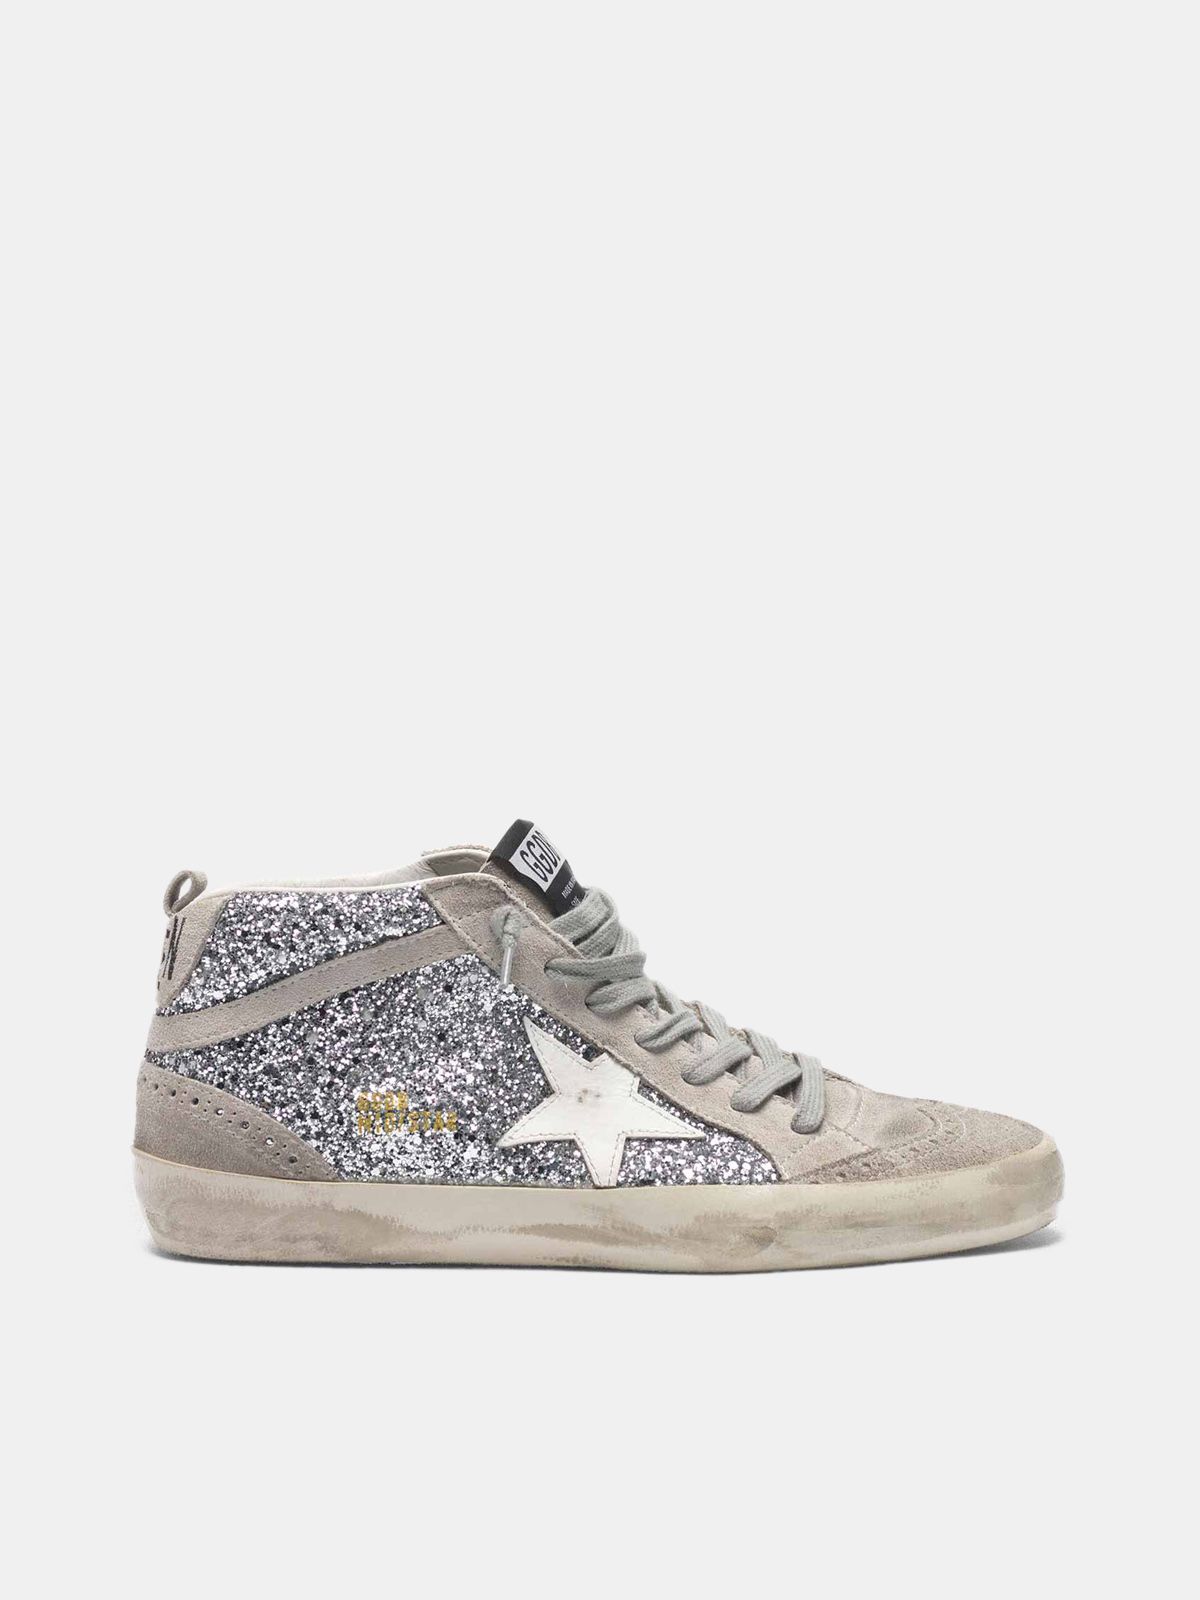 Mid Star sneakers in glitter and suede